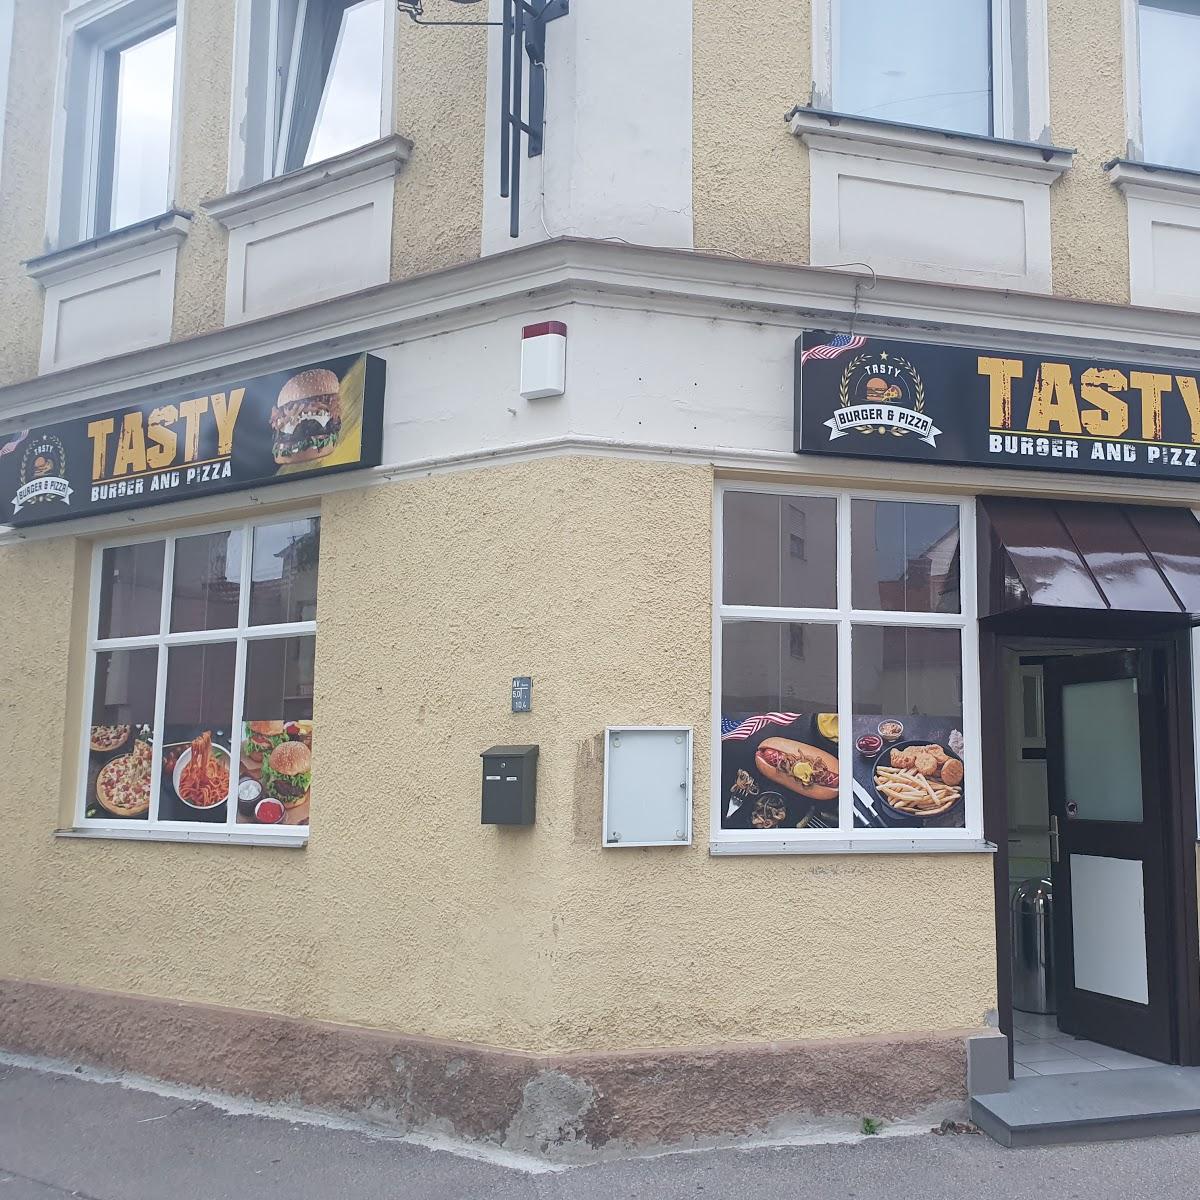 Tasty Burger and Pizza